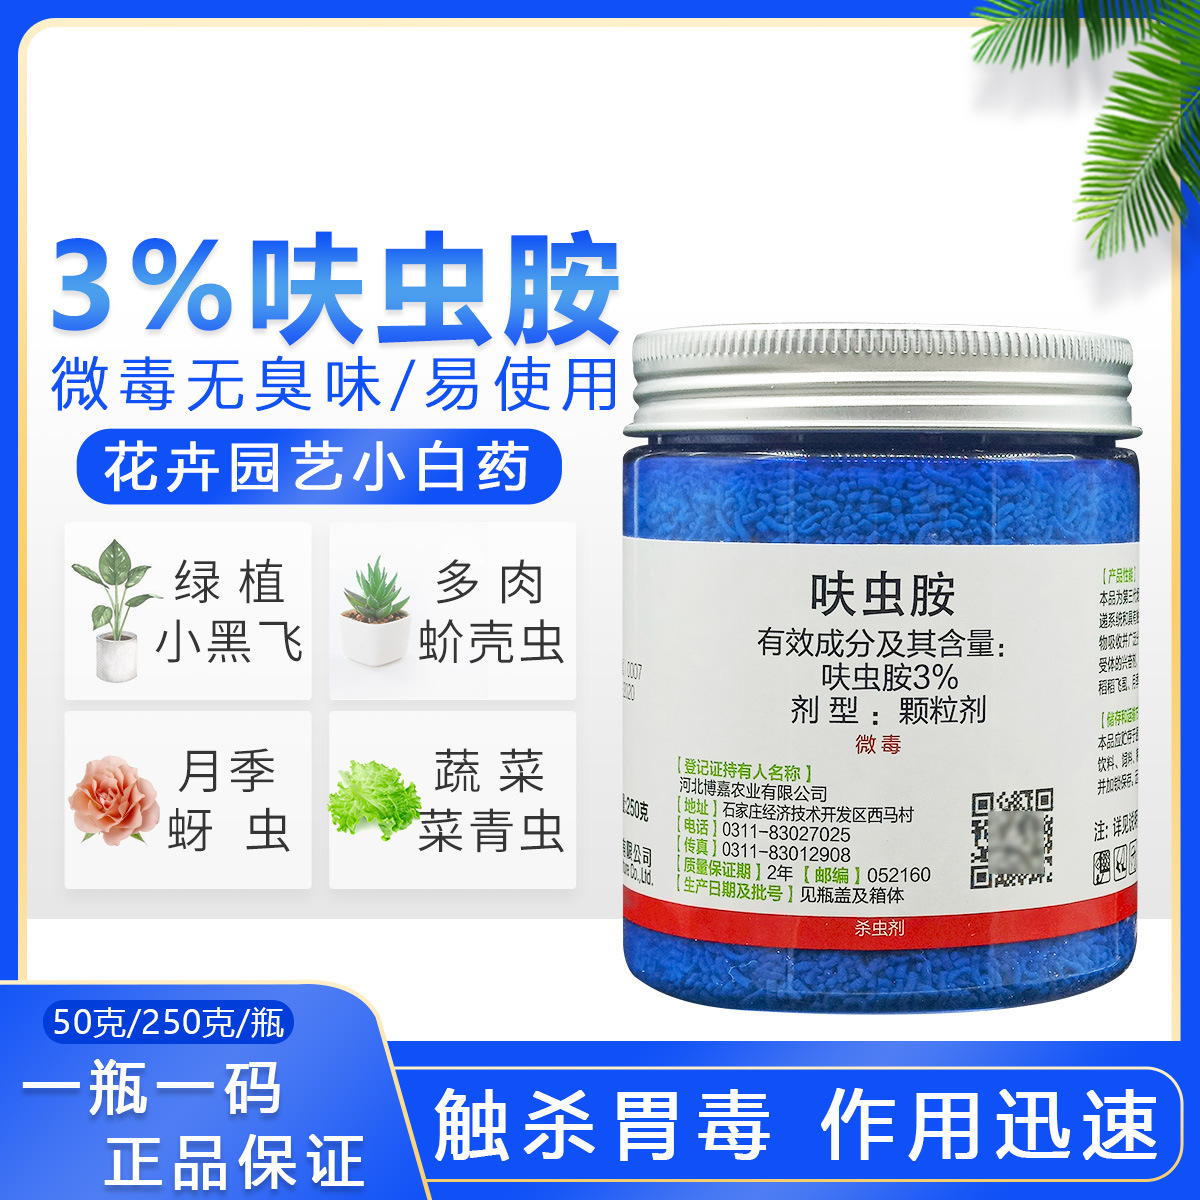 3% Baiyao flowers and plants Pest control drugs flowers and plants Black Rice planthopper aphid currency Insecticide